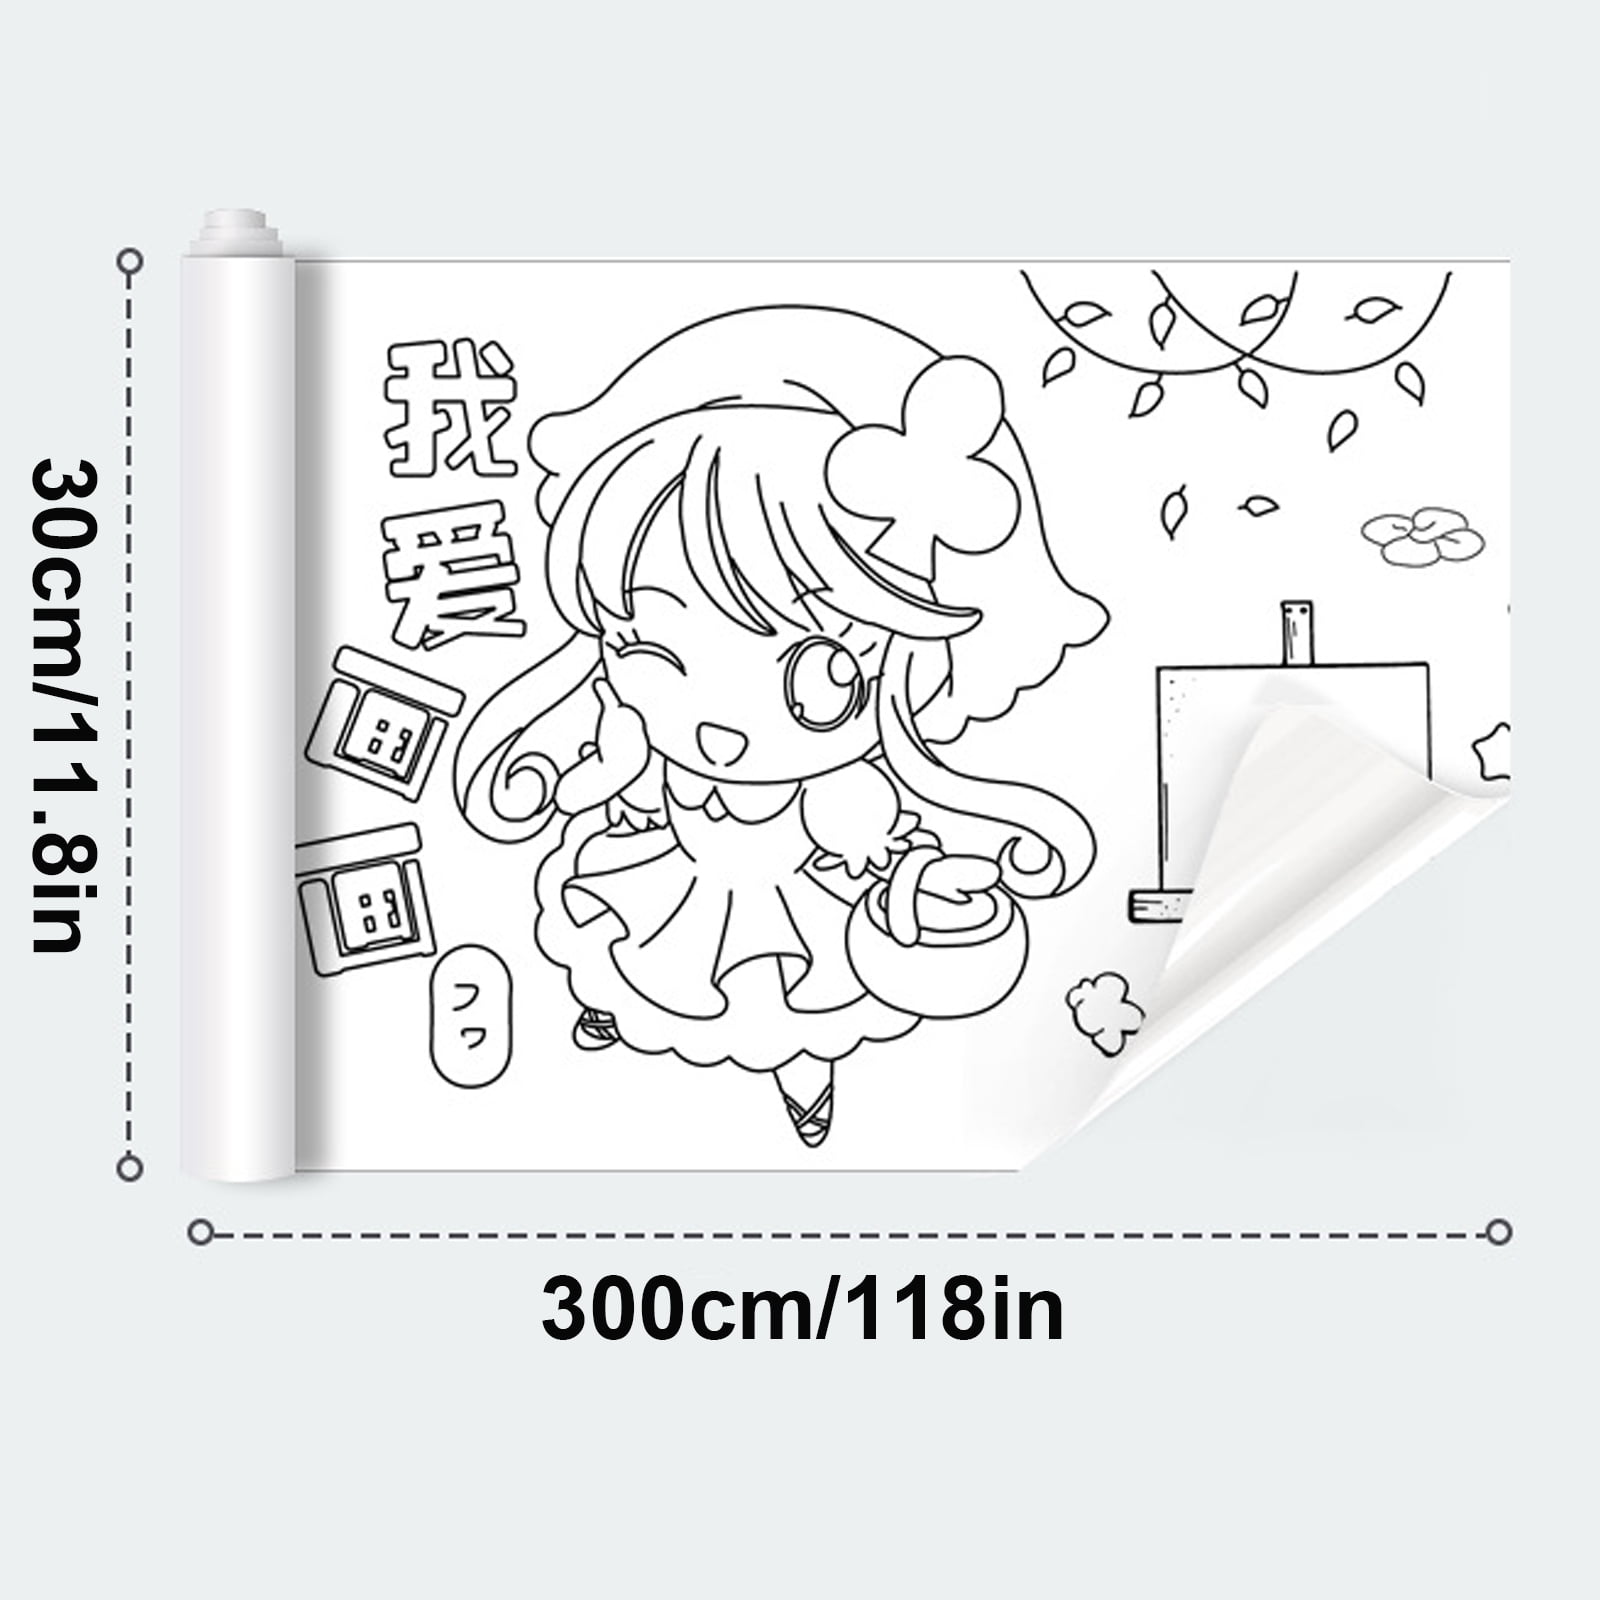 Gneric 2 pcs children's drawing roll, 118 12.35 inch coloring paper roll  diy painting drawing paper, drawing roll paper for kids, st